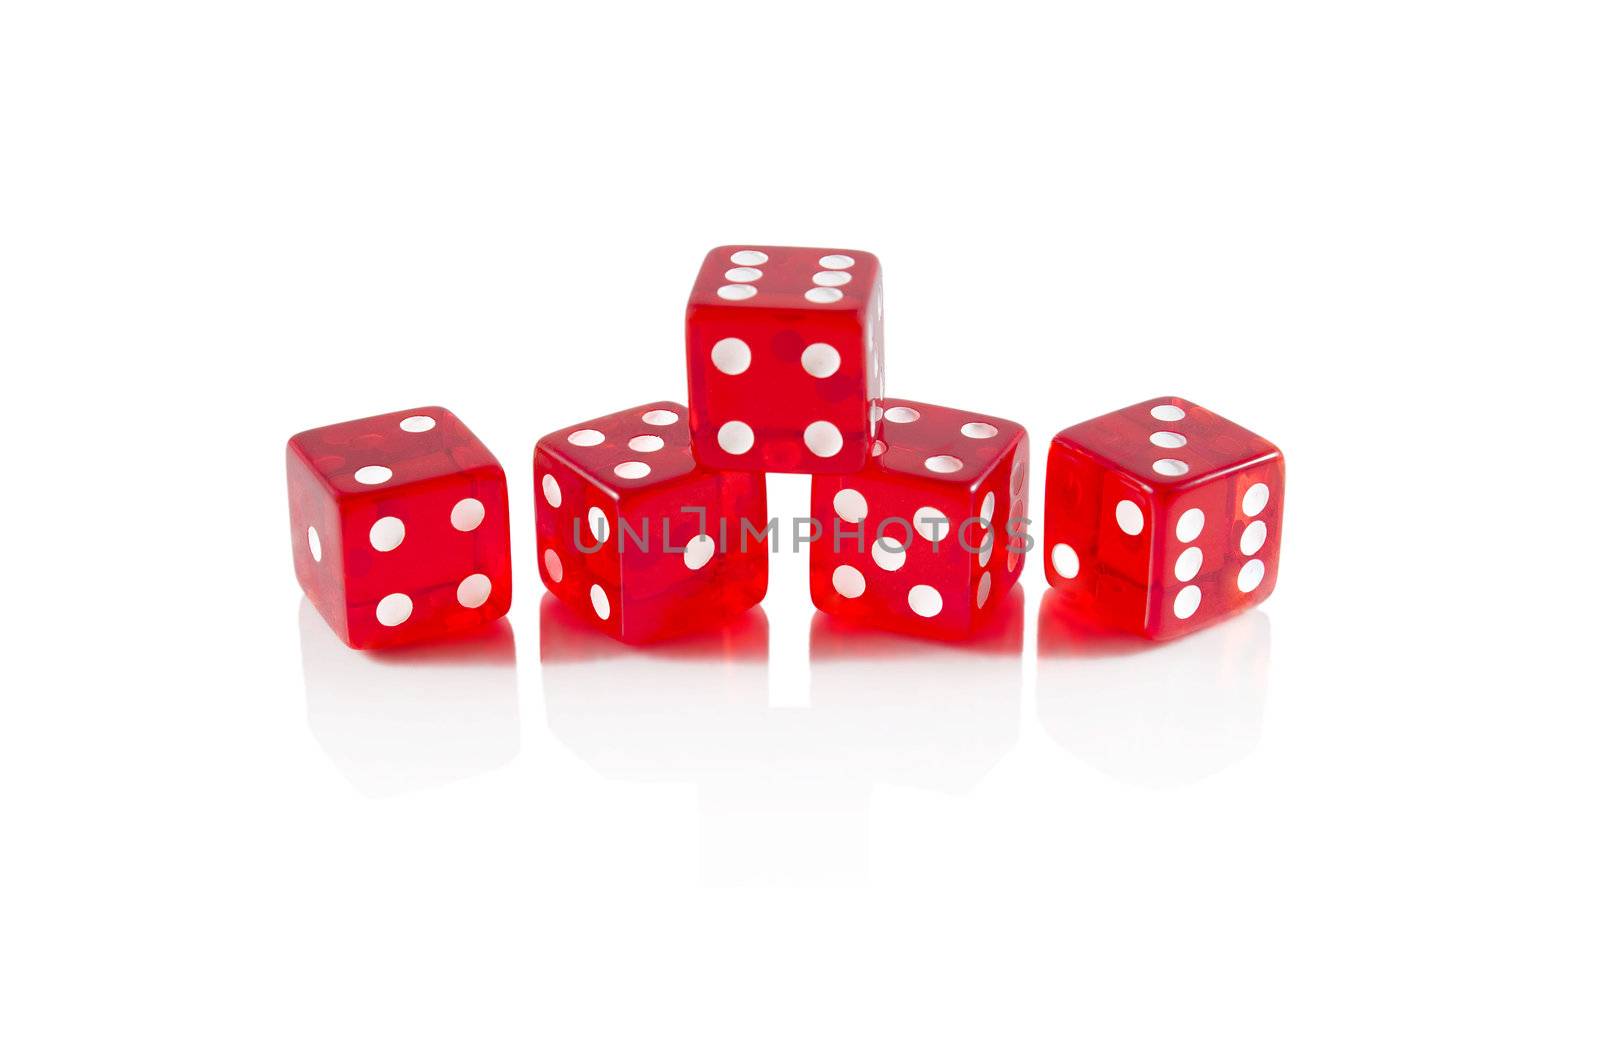 Red dice on white isolated background by HERRAEZ